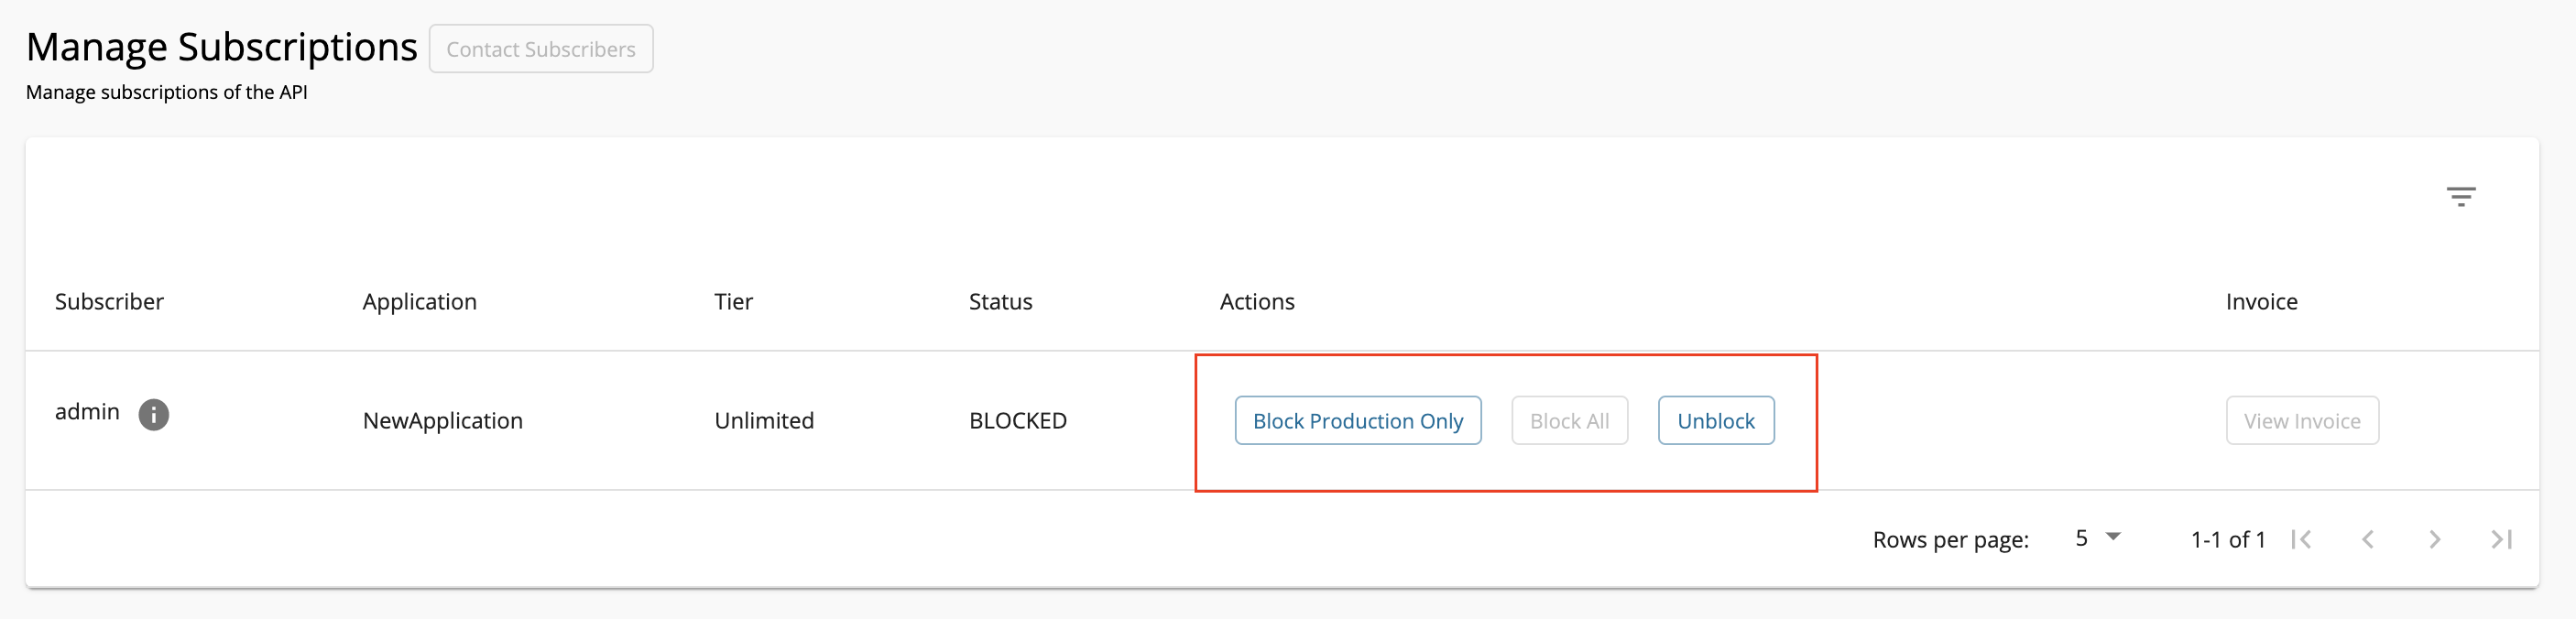 Have the same application for two APIs and block all subscriptions